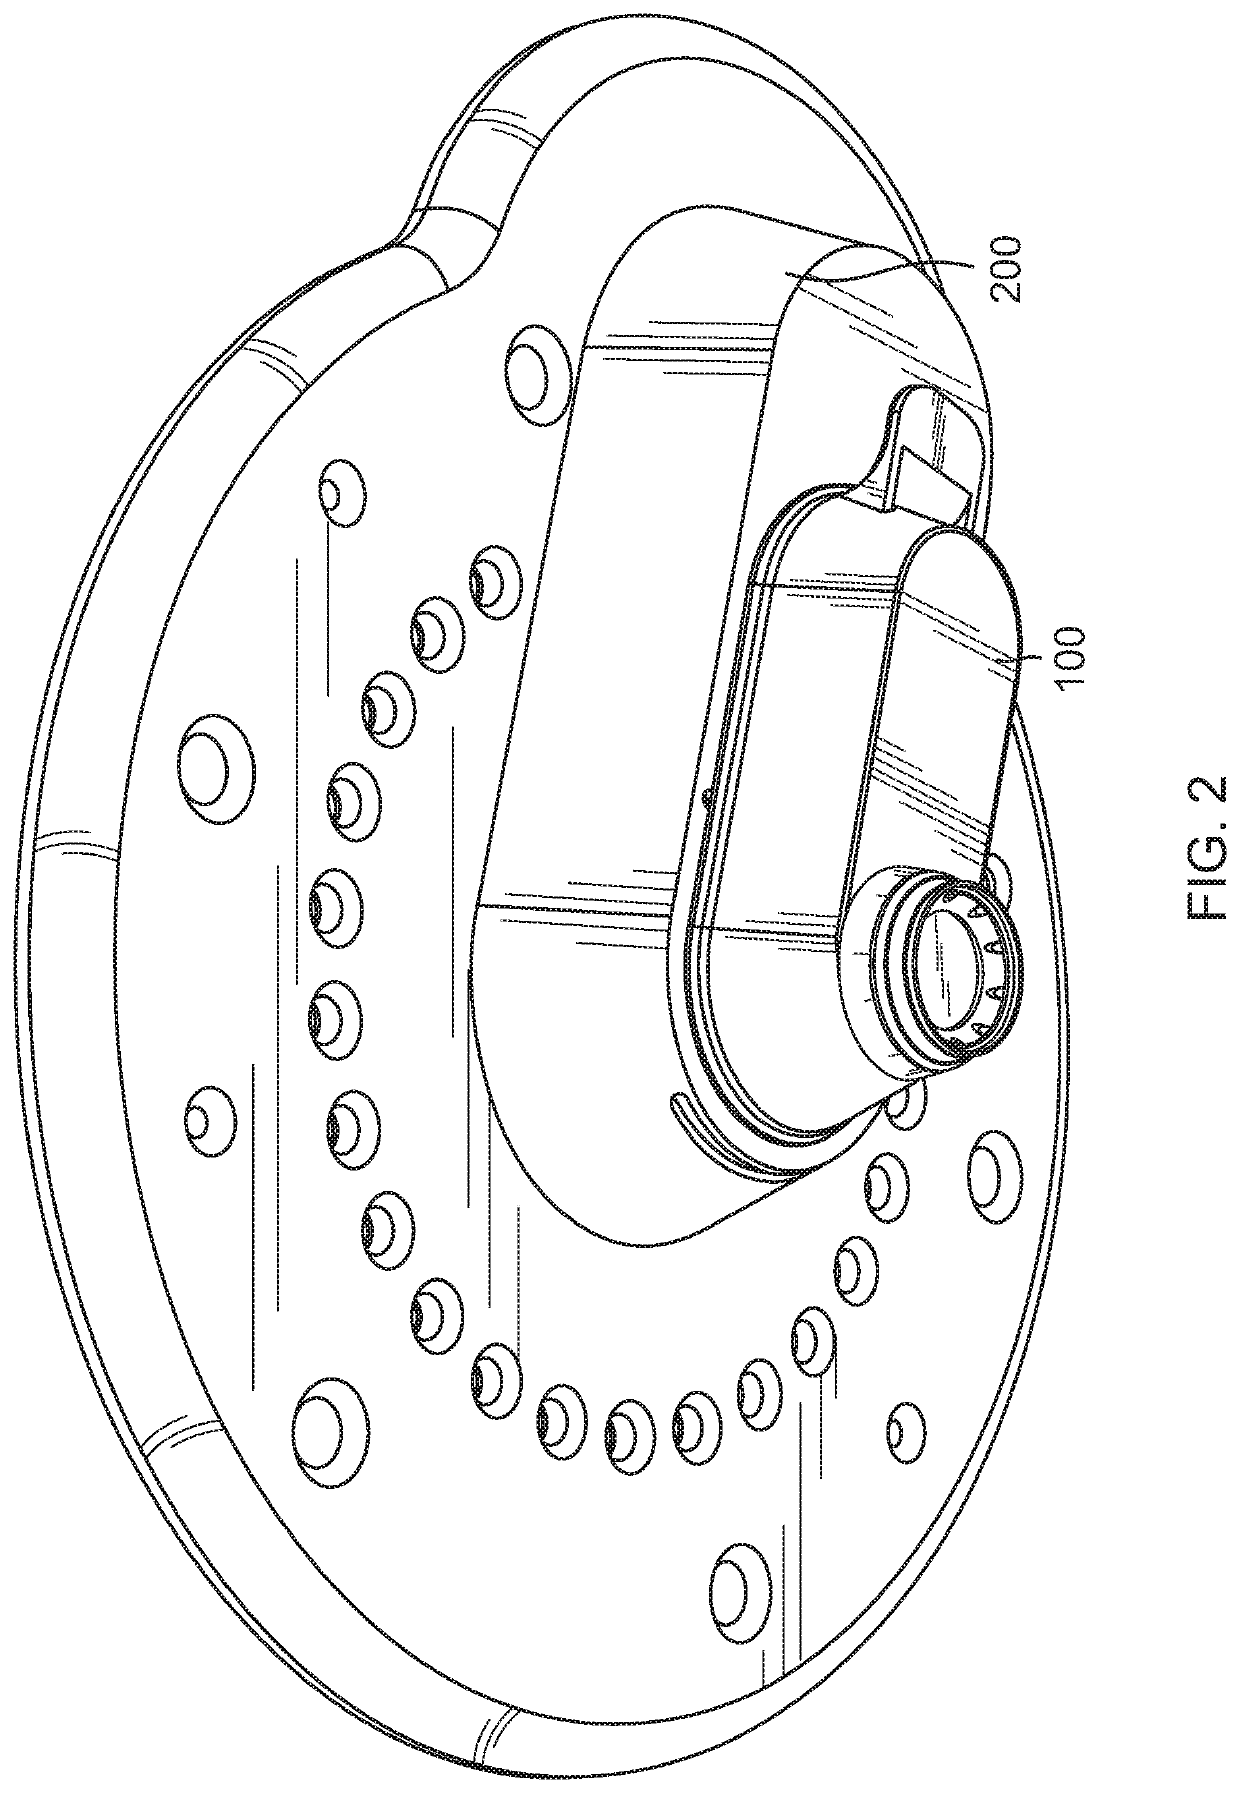 Patient interface device for ophthalmic surgical laser system